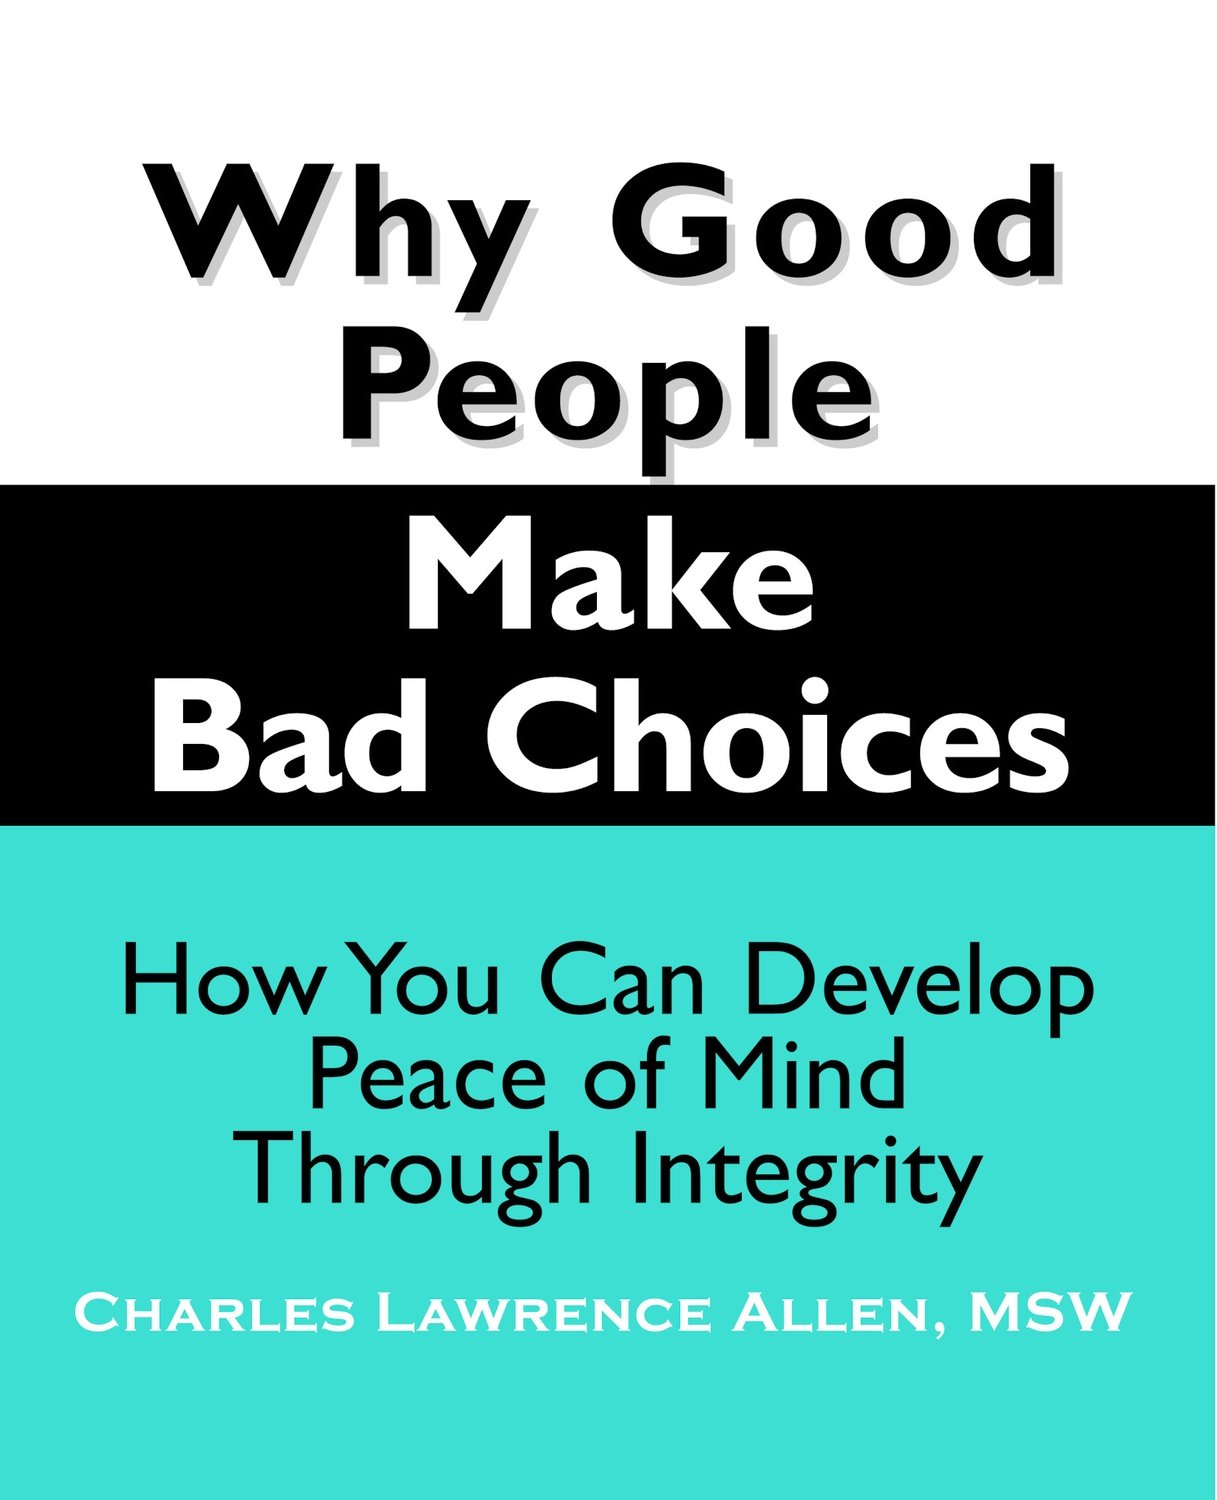 Why Good People Make Bad Choices: How You Can Develop Peace of Mind Through Integrity